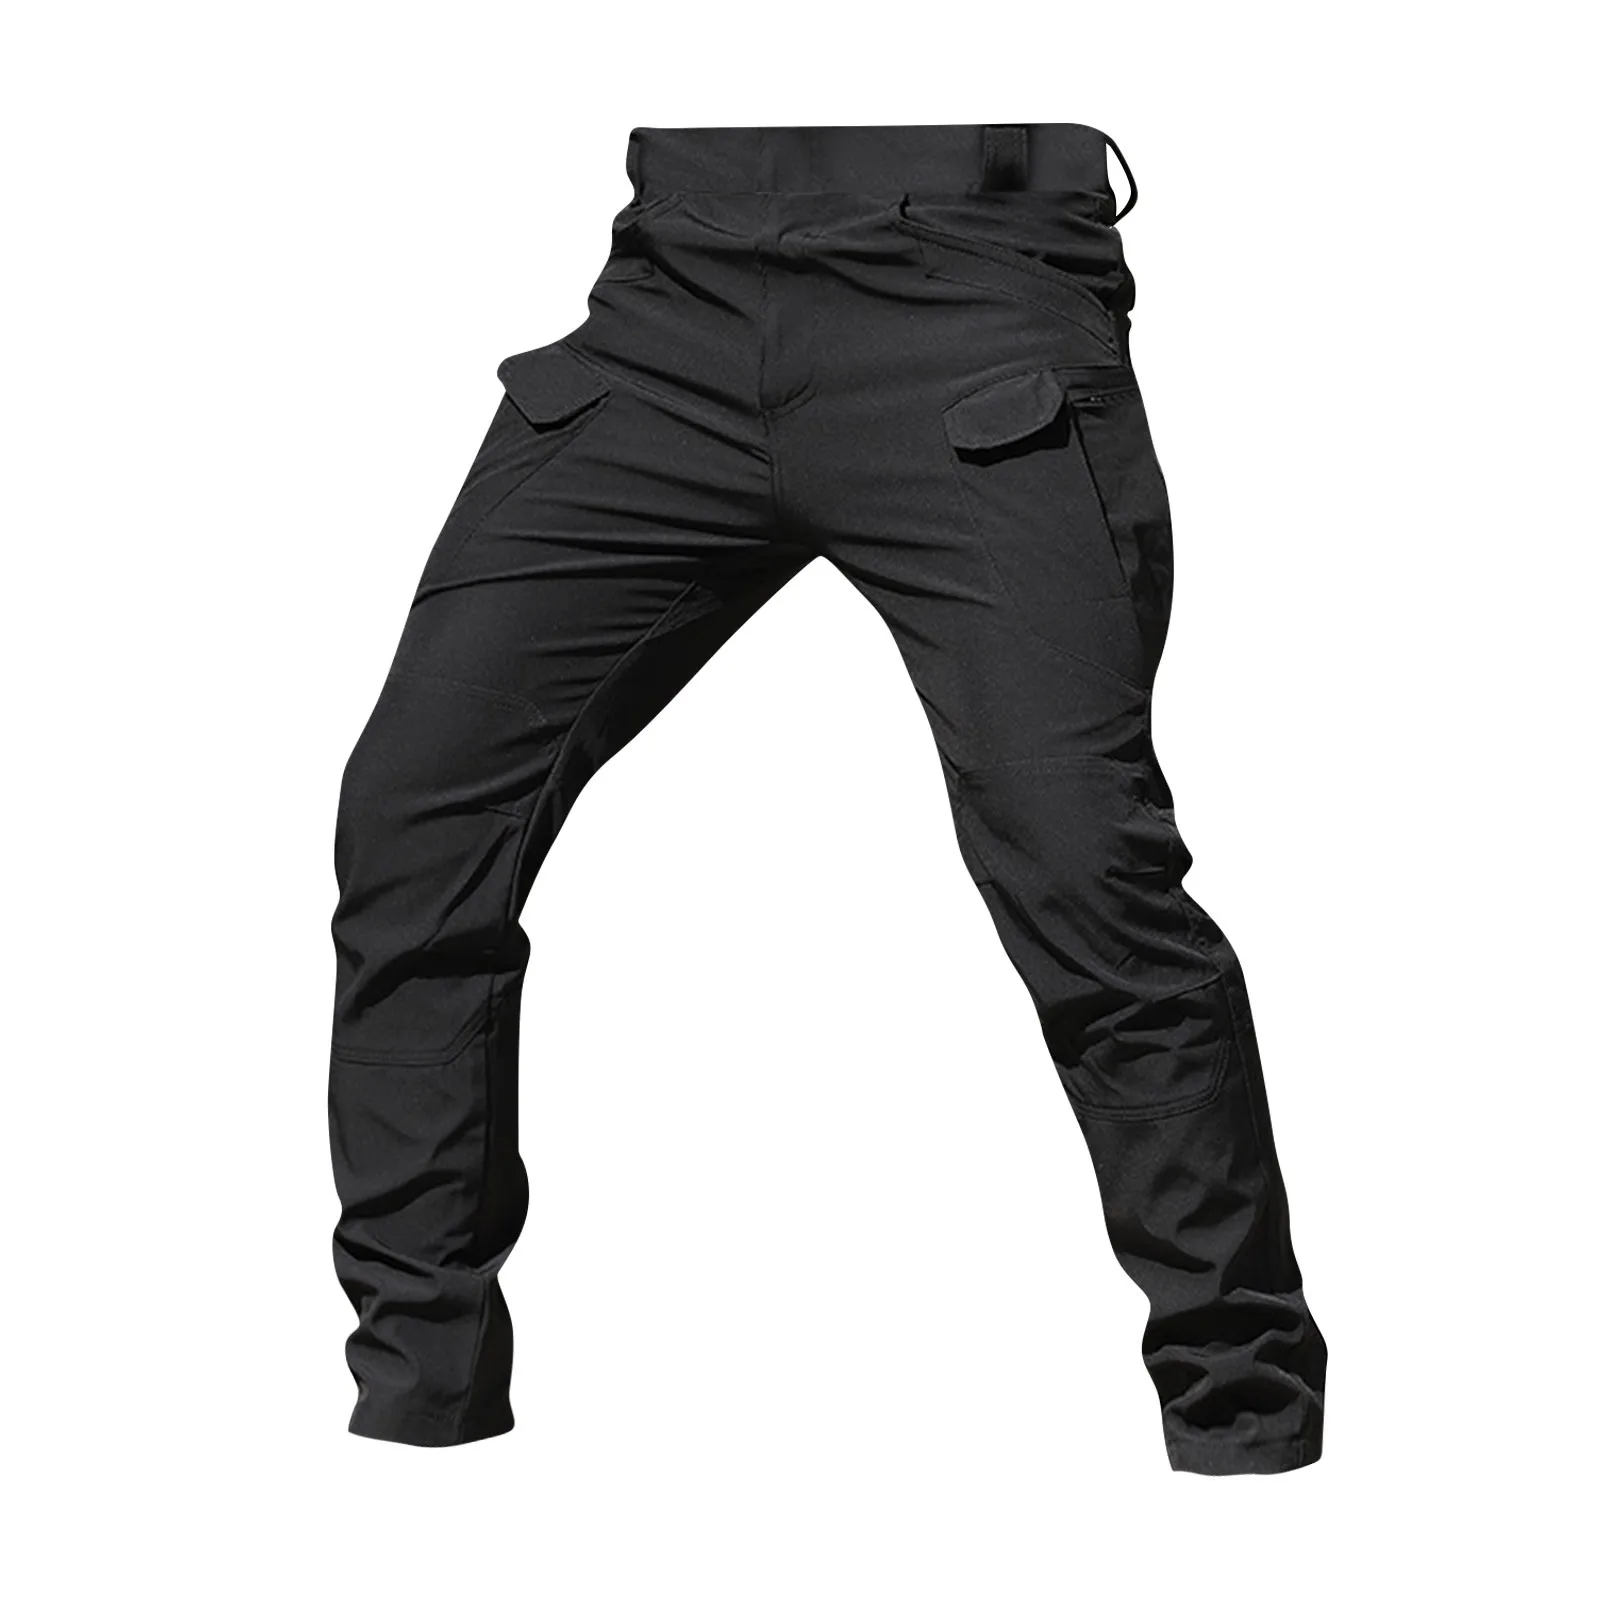 

Men' Pants City Special Service Pants Special Forces Army Long Pants Multi Pocket Overalls Jogger Casual Sports Cargo Pants